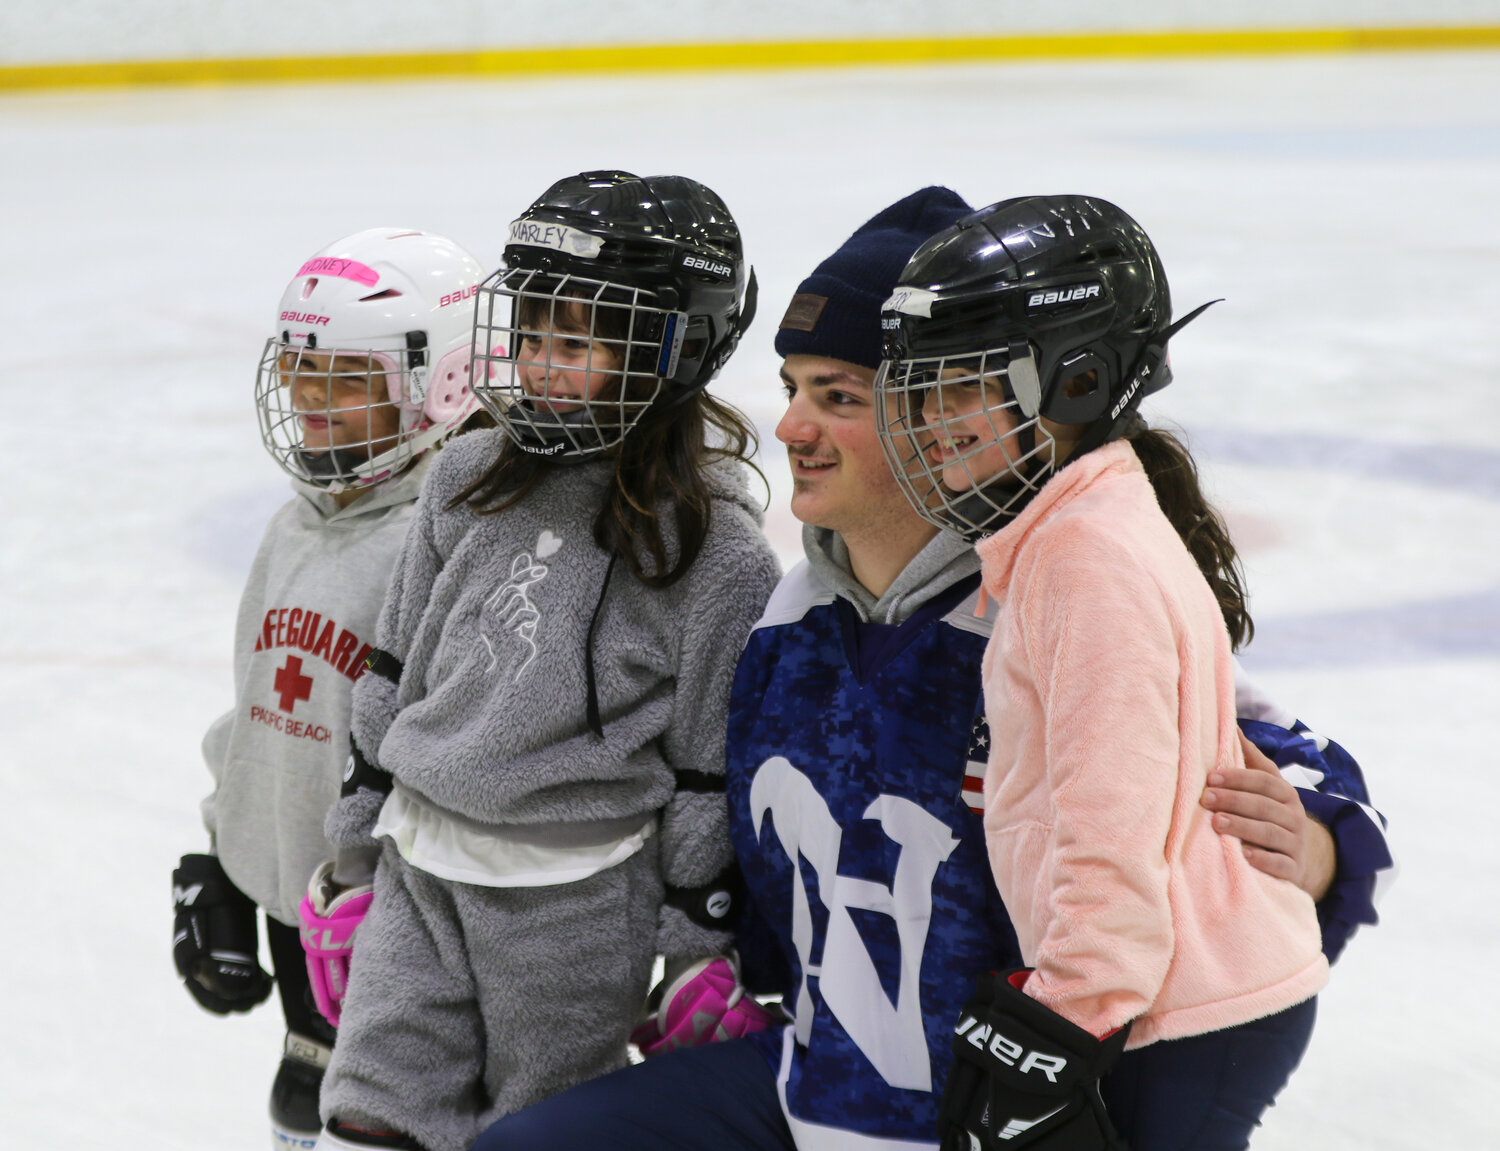 The varsity boys hockey team hosted an open skate Wednesday night at Nantucket Ice, where the Whalers were joined by family, alumni and youth hockey players.